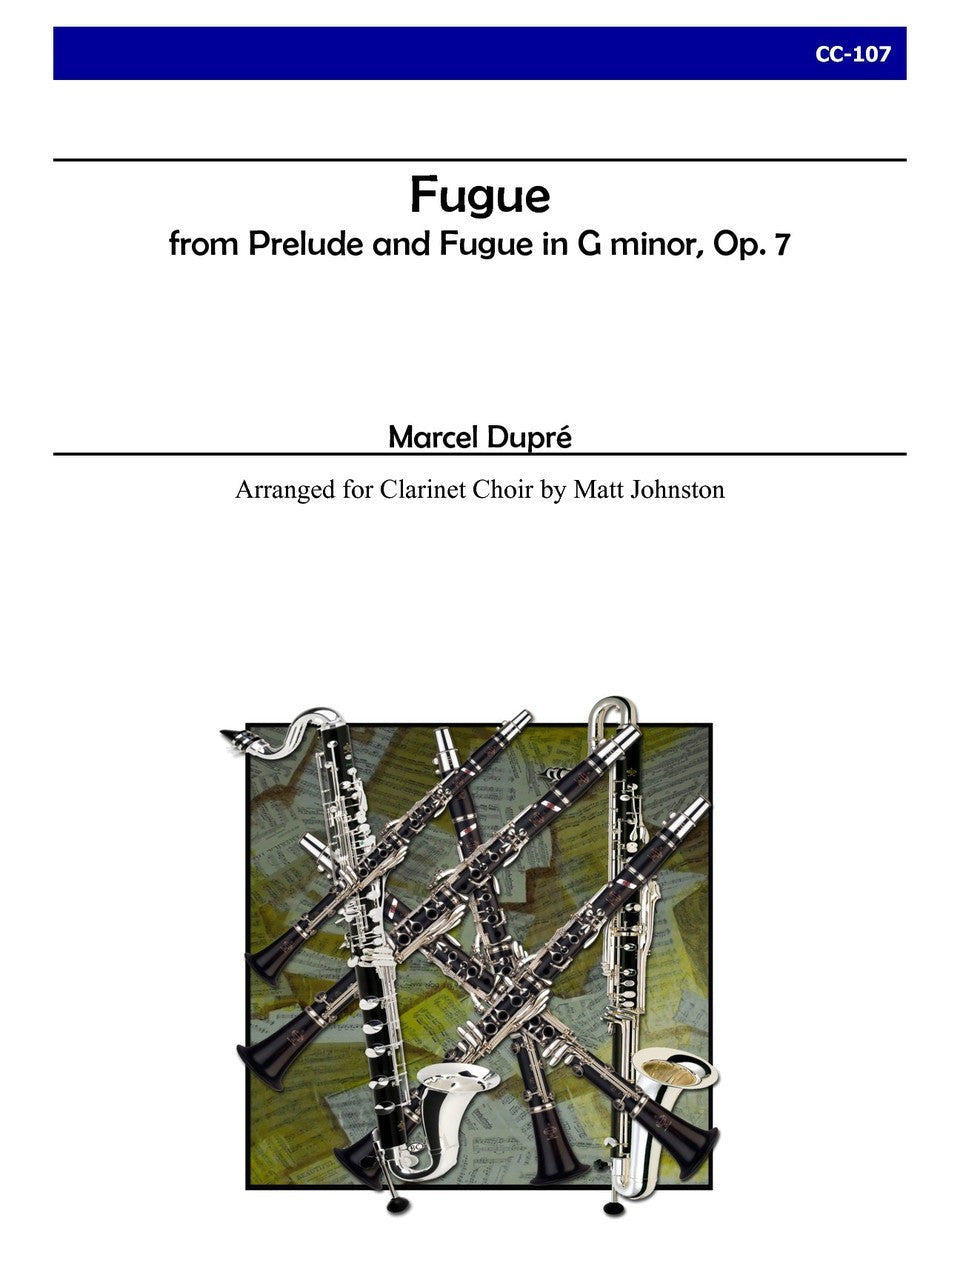 Dupre (arr. Matt Johnston) - Fugue from Prelude and Fugue in G minor for Clarinet Choir